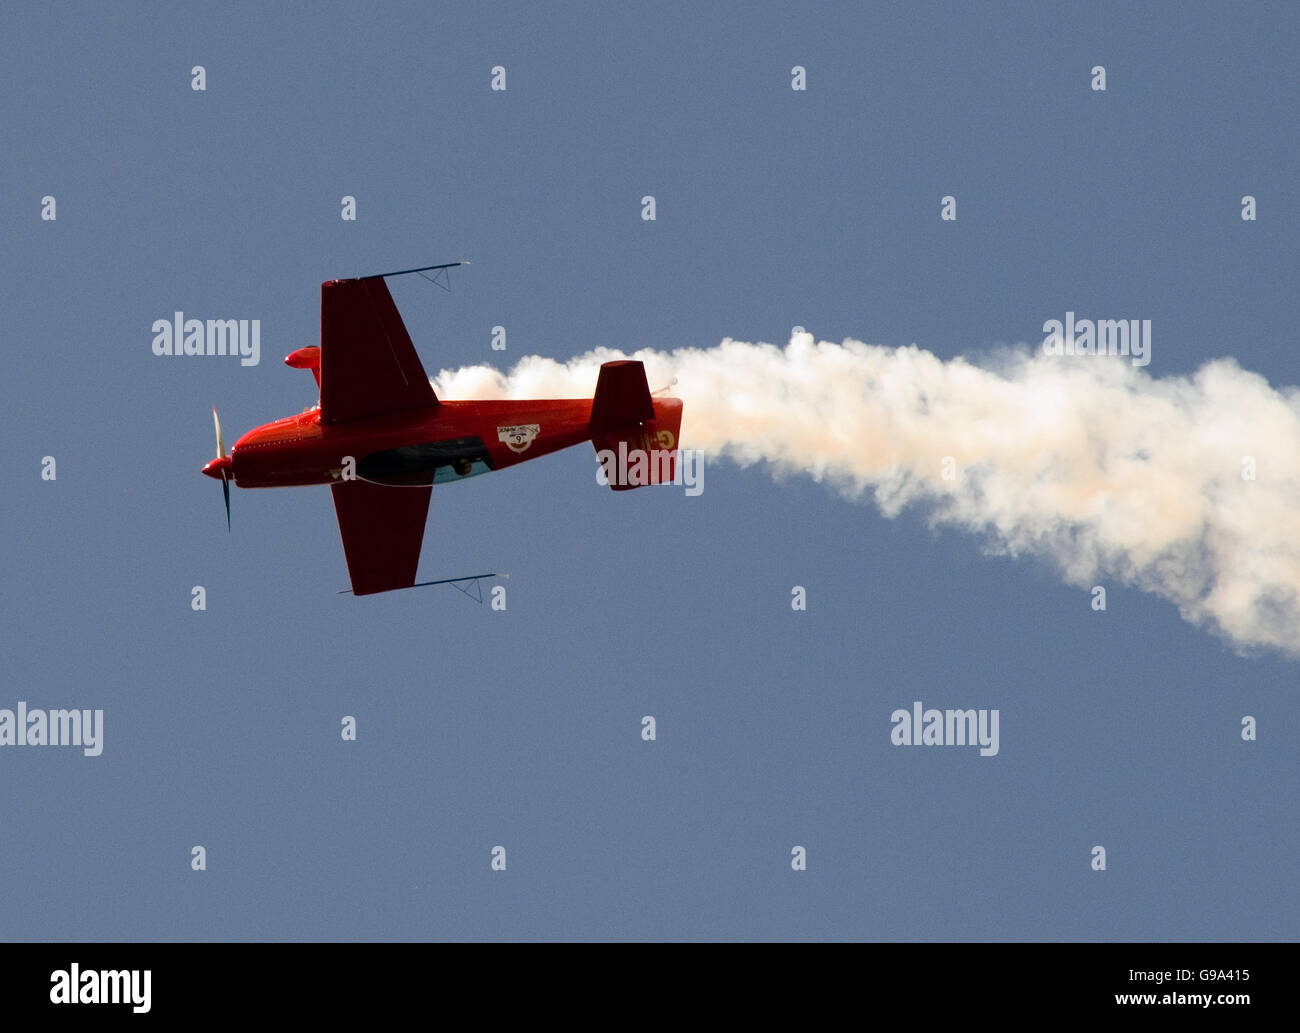 Red Bull Air Race World Series - Longleat House. An aircraft in action Stock Photo